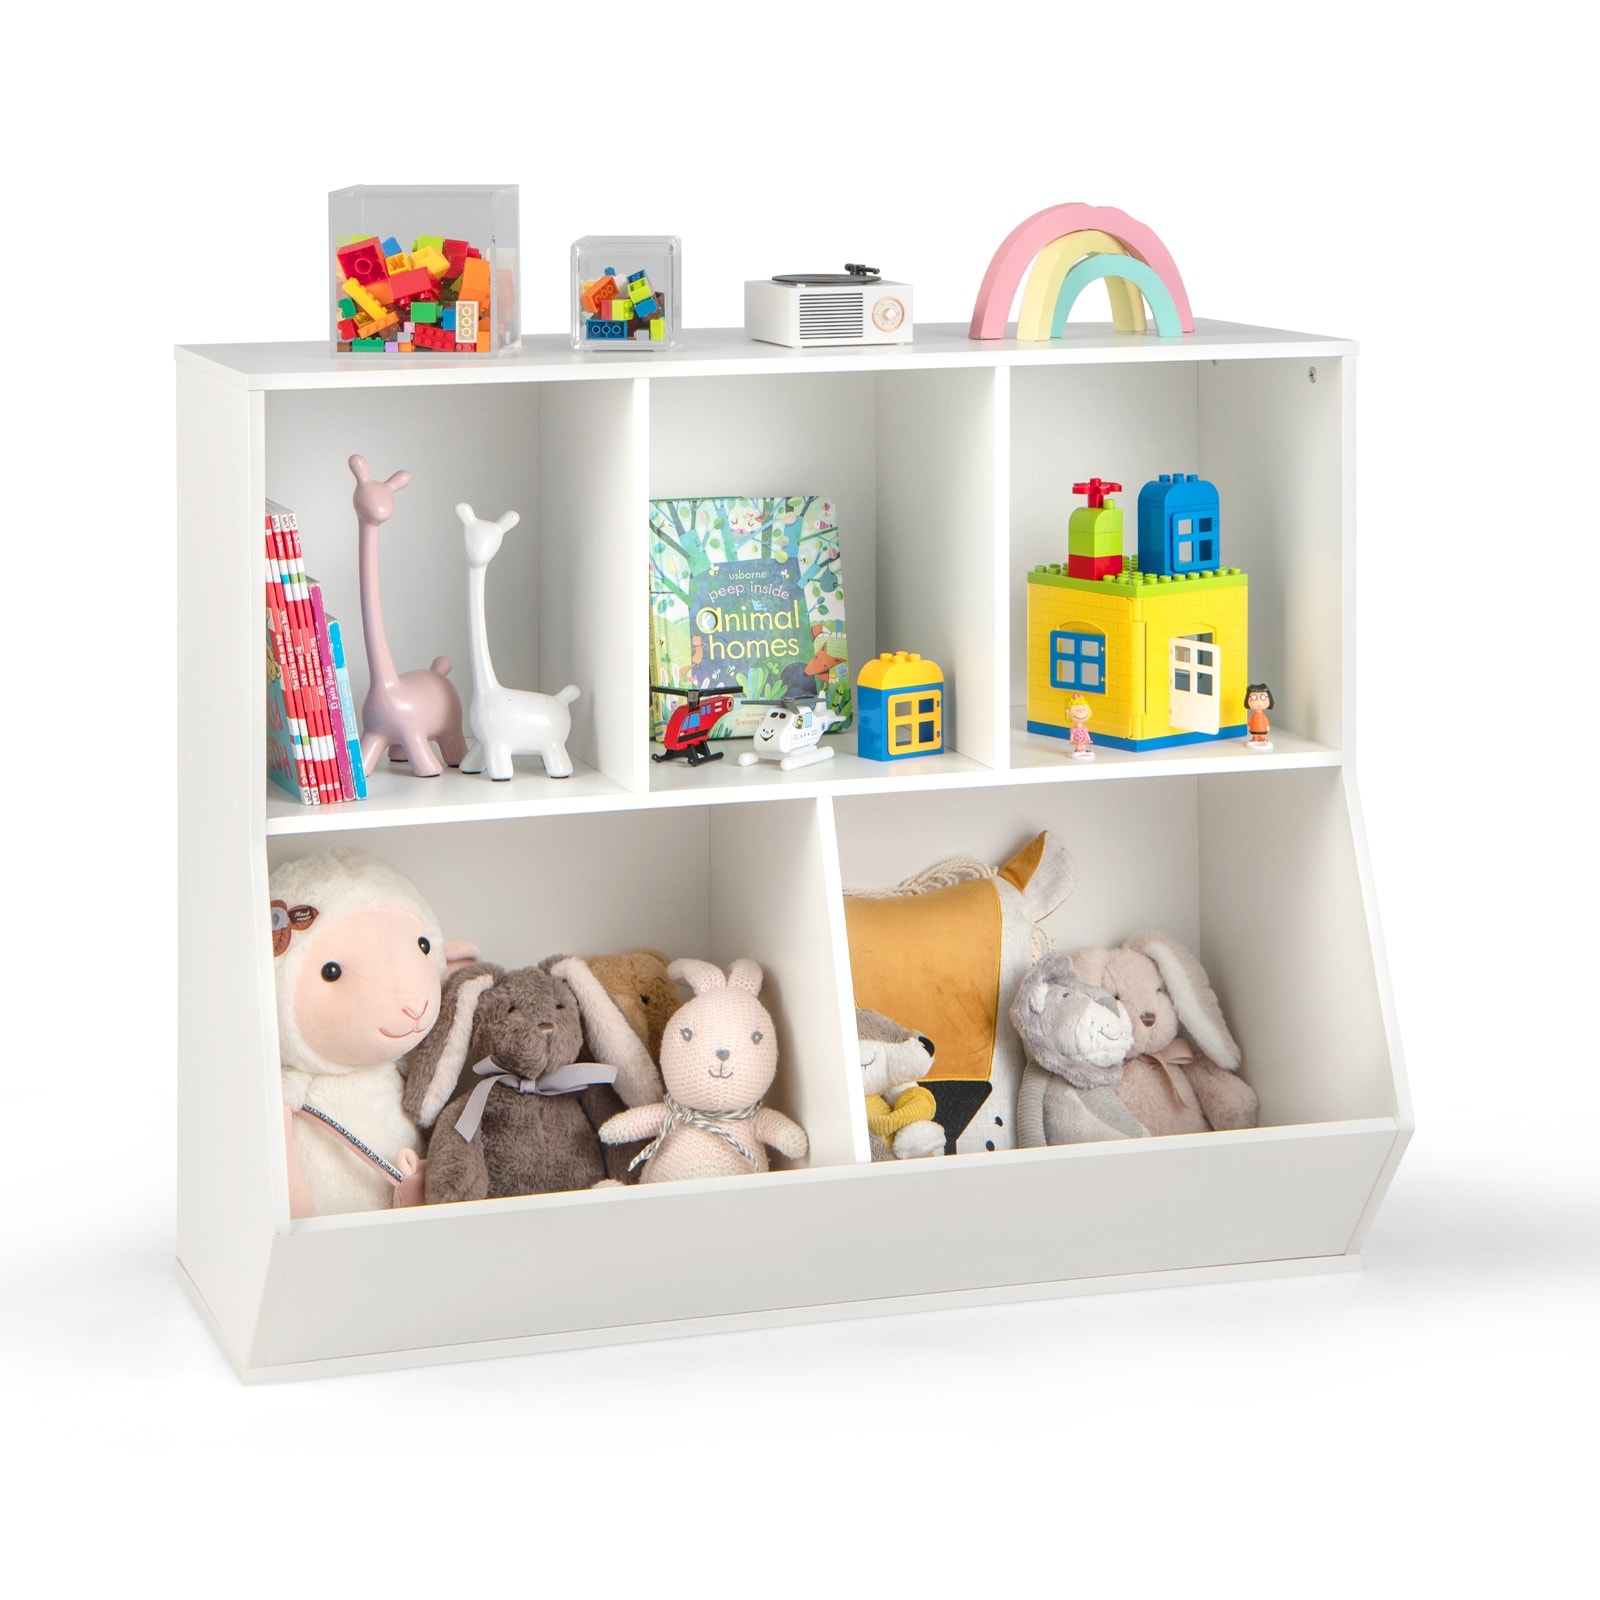 https://ak1.ostkcdn.com/images/products/is/images/direct/e48c2fa5b651d94a594d27908c0236b97dcf1699/Costway-5-Cubby-Kids-Toy-Storage-Organizer-Wooden-Bookshelf-Display.jpg